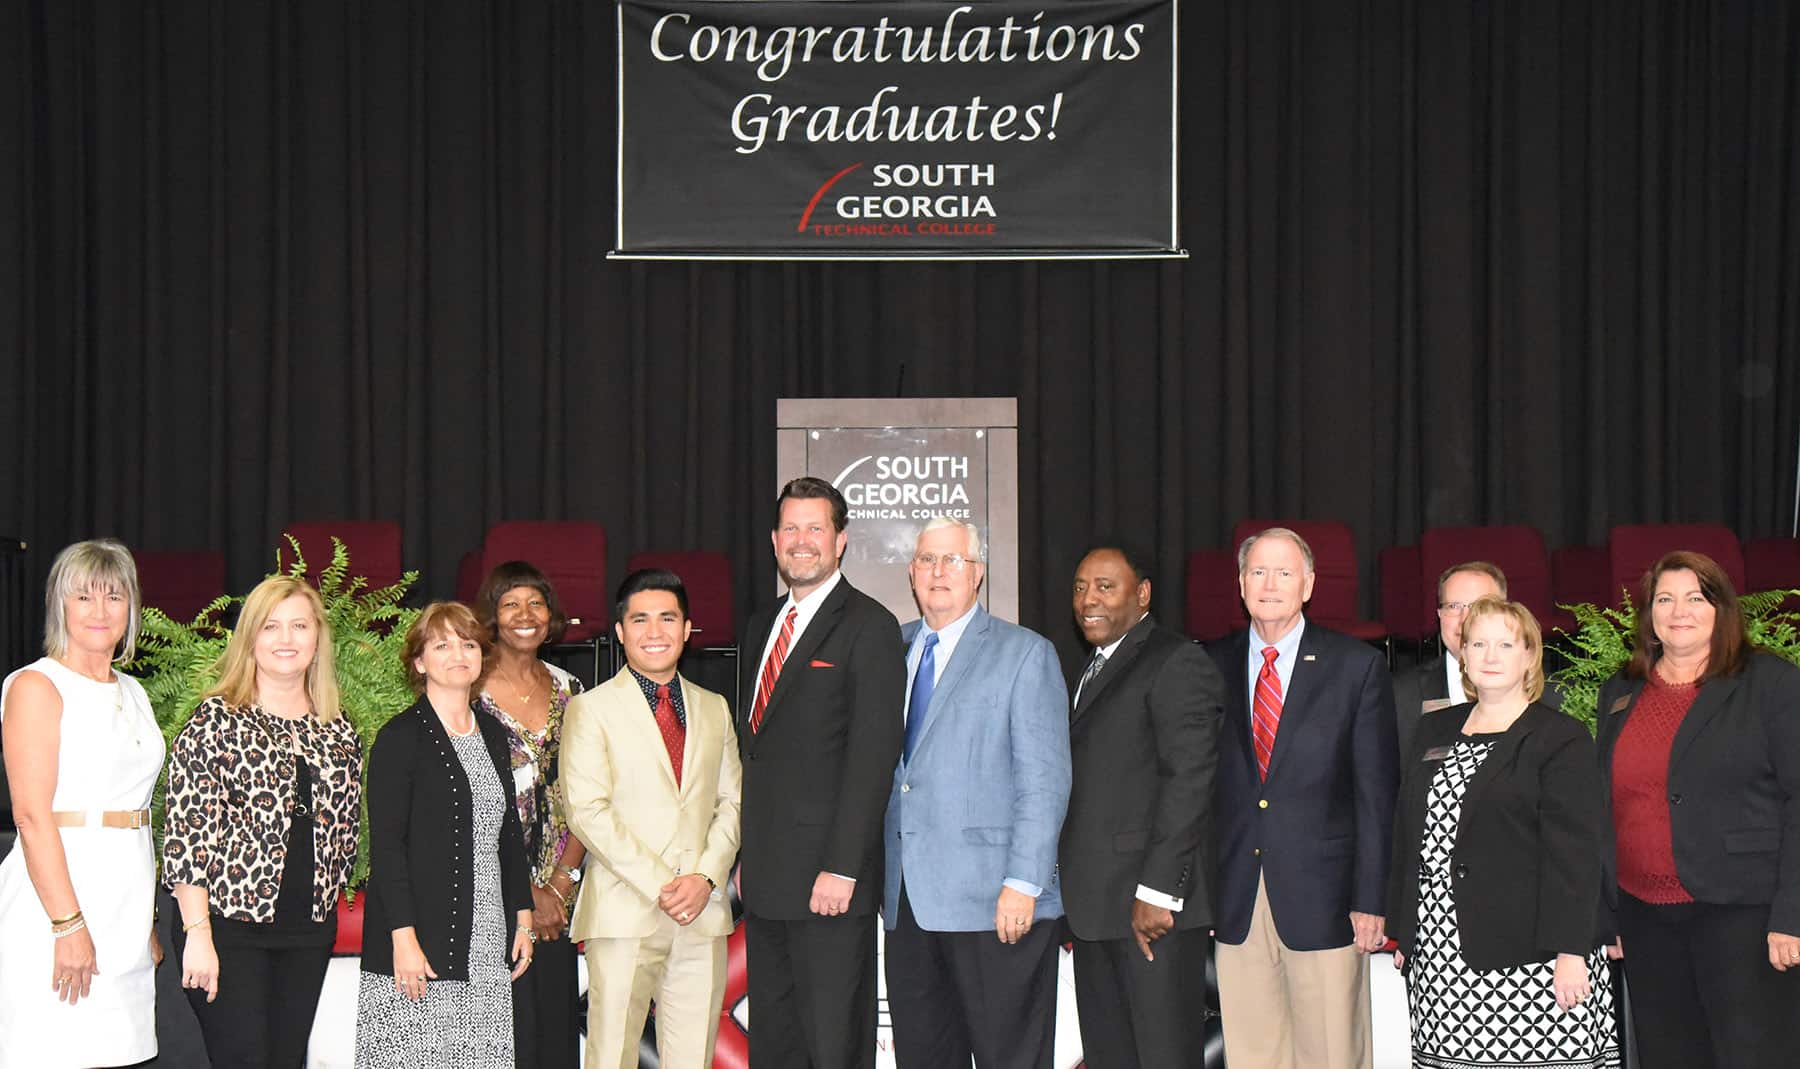 South Georgia Tech GED Graduation Officials - Shown above (l to r) are South Georgia Technical College GED Chief Examiner Connie Wise, SGTC Interim Director of Adult Education Michelle McGowan, Instructor Tonya Visage, SGTC Board Chairperson Janet Siders, SGTC Eagle winner and speaker Pable Castaneda, SGTC President Dr. John Watford, Vice President of Economic Development Wally Summers, Rev. Michael Cunningham, Assistant to the President Don Smith, Vice President of Academic Affairs David Kuipers, Vice President of Administrative Services Lea Coe, and Vice President of Institutional Support and IT Karen Werling.